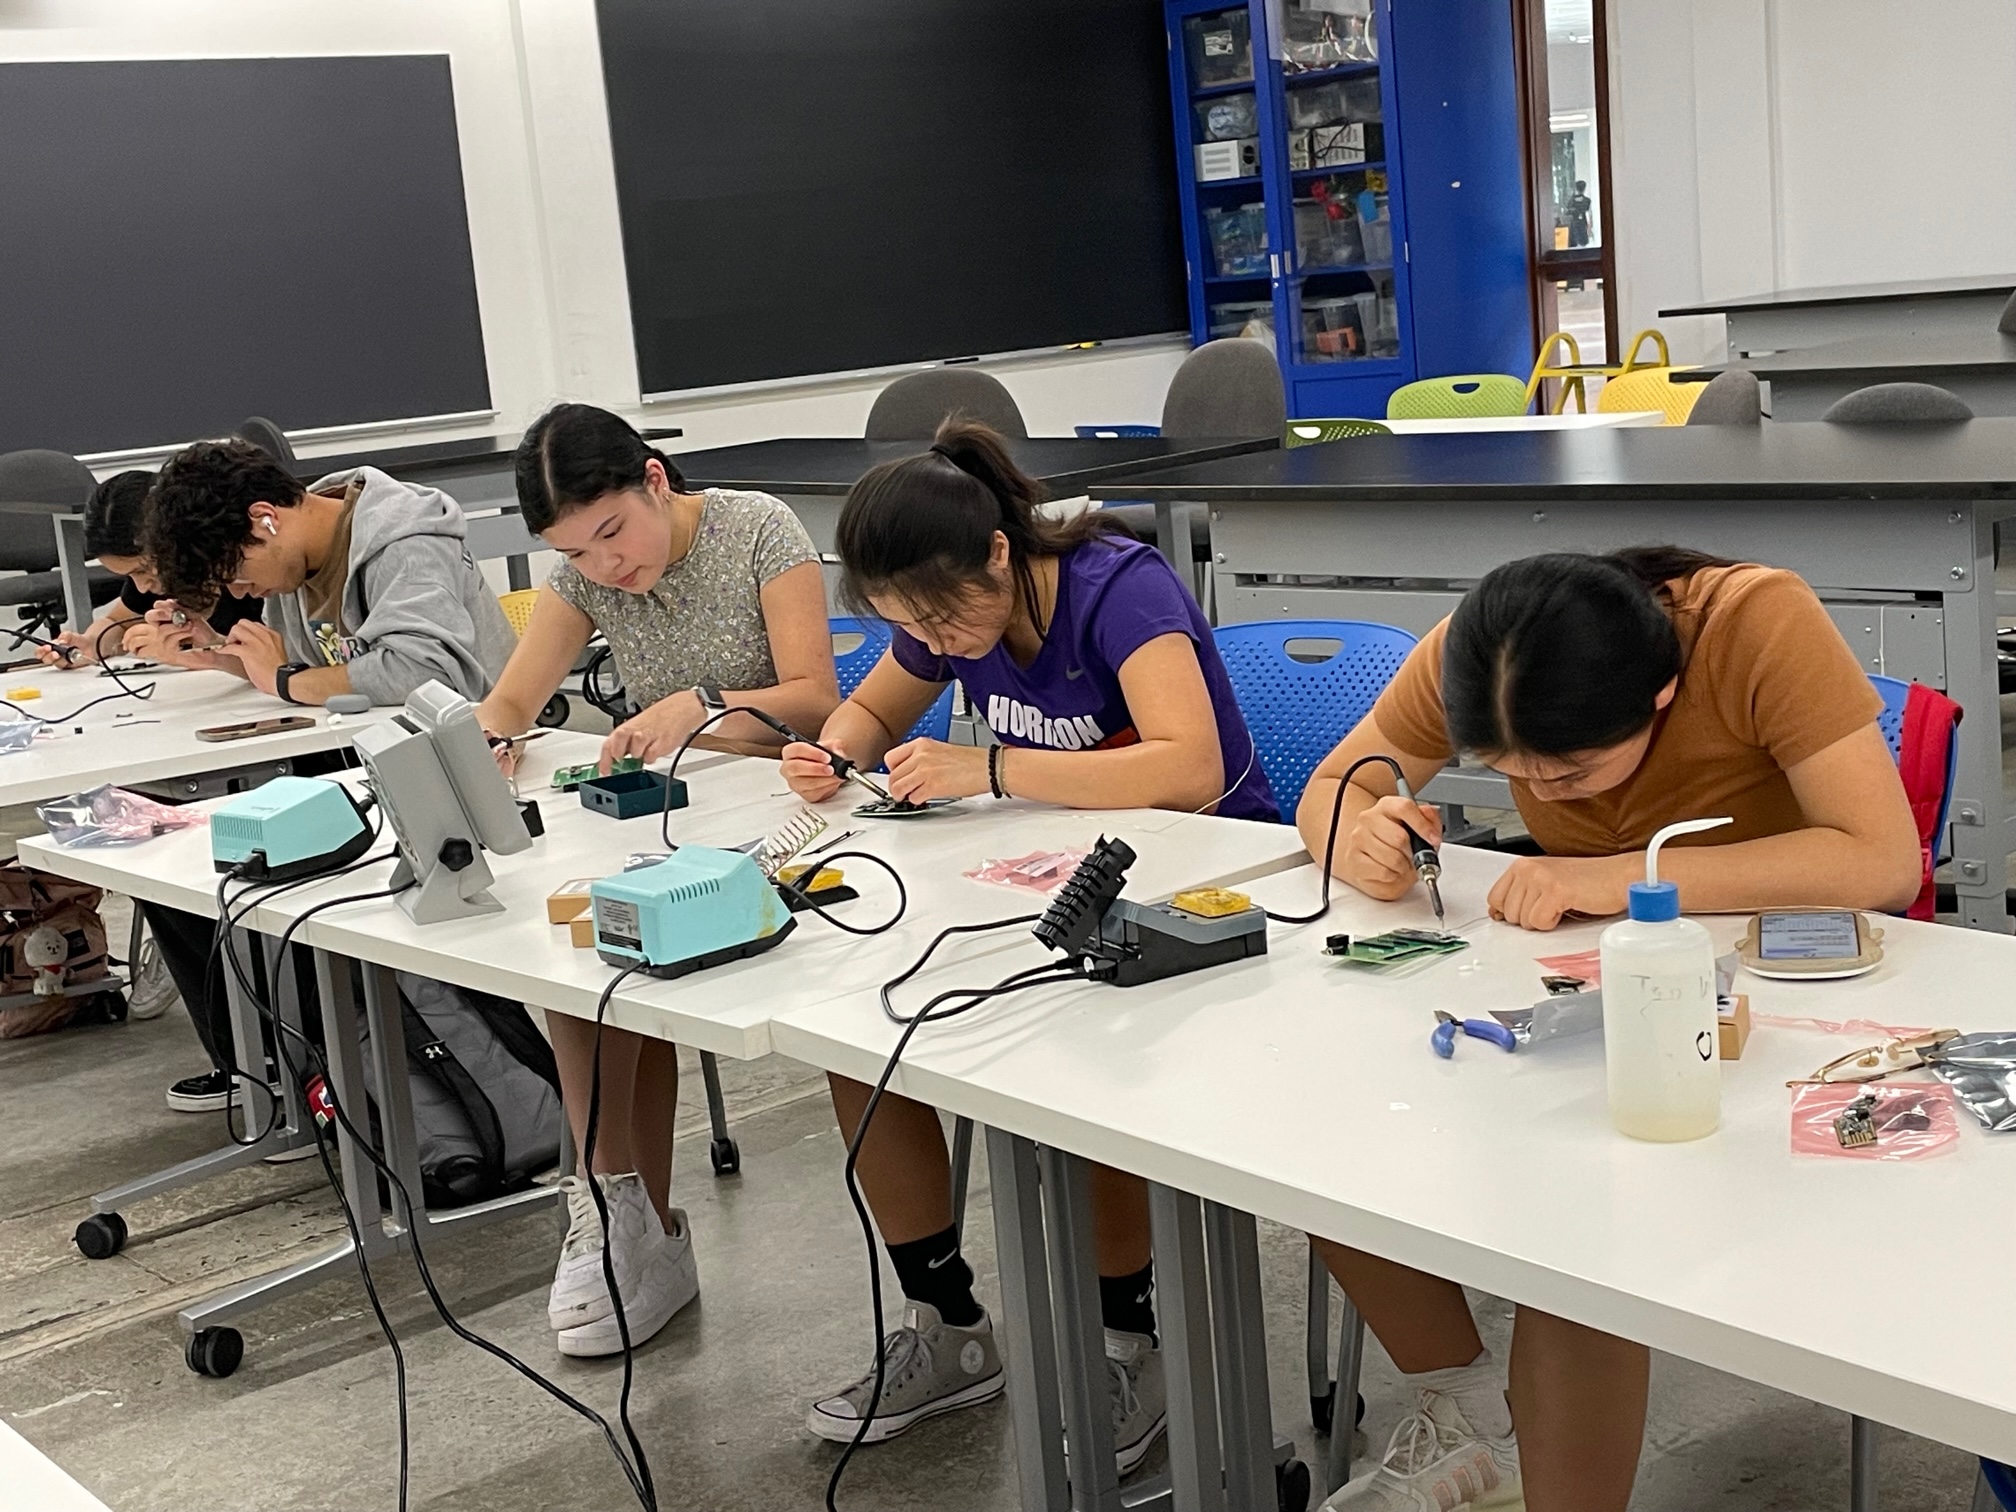 A long white table with five students sitting while working at soldering stations soldering LightSound components at a Harvard University LightSound workshop.